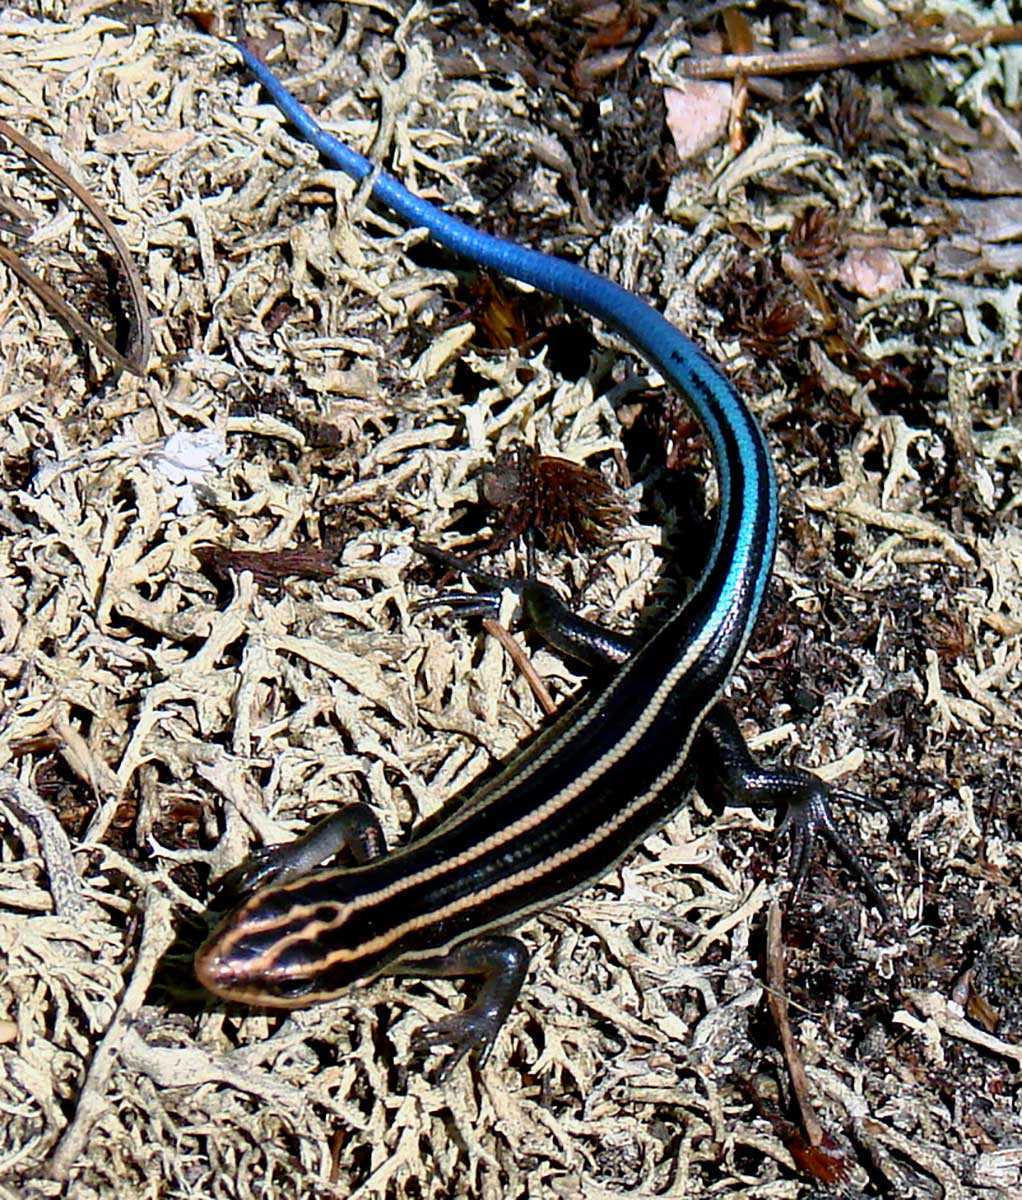 Five-lined skink (Eumeces fasciatus) – special concern provincially and nationally